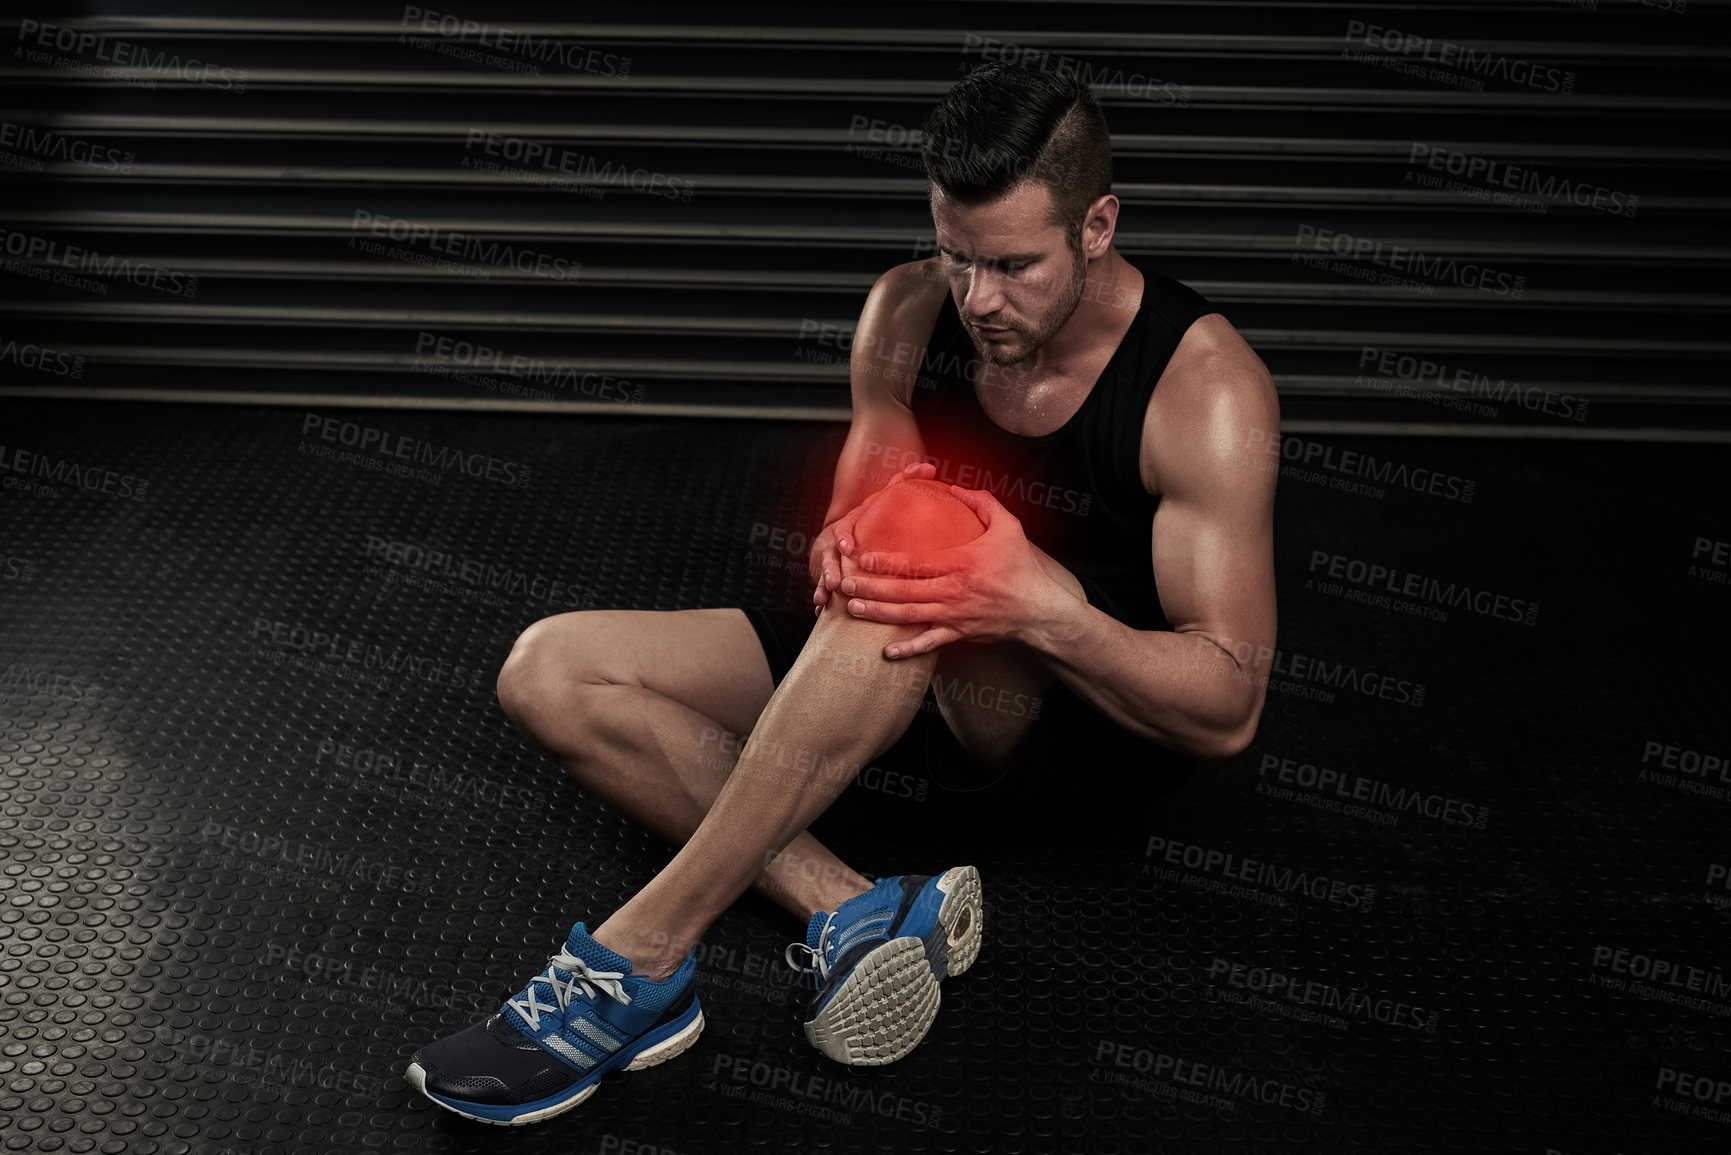 Buy stock photo High angle shot of an athletic young man working out with an injury in the studio